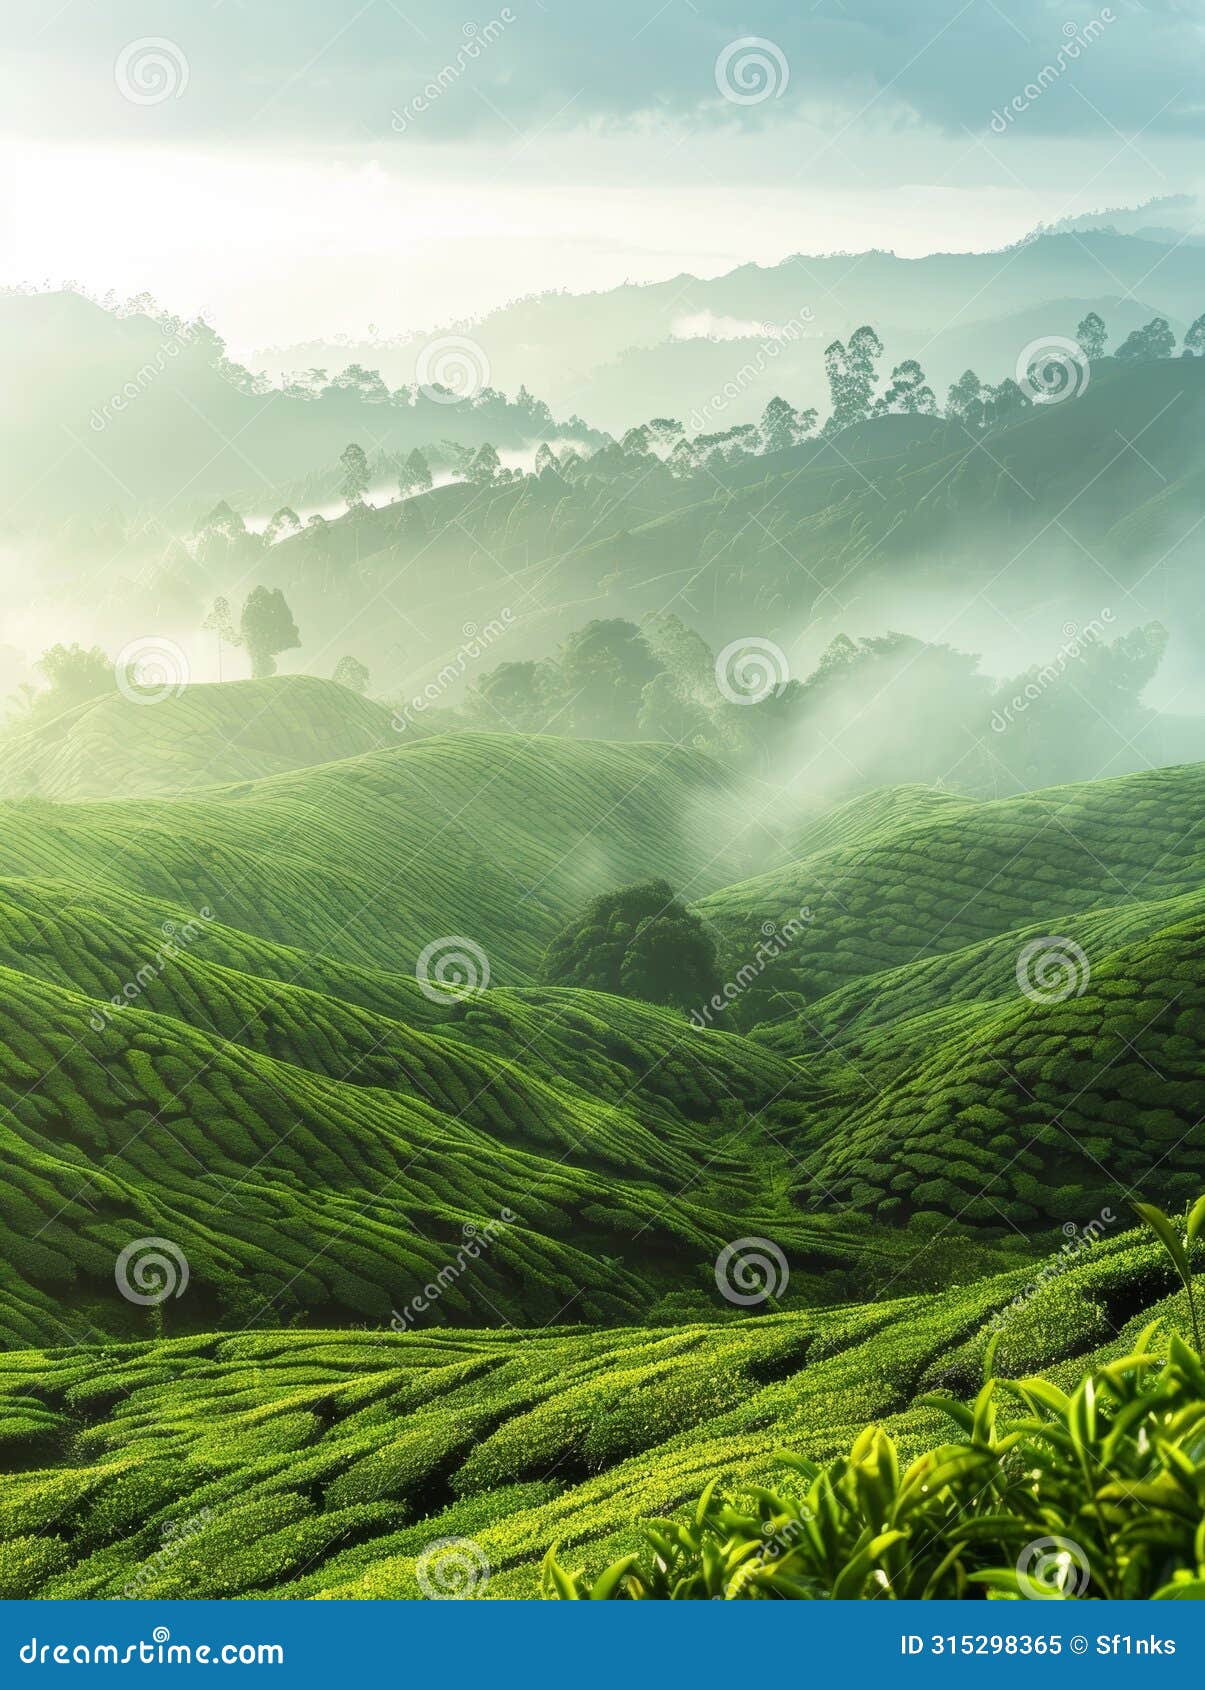 captivating vistas of a tea plantation shrouded in a soft, ethereal mist, creating a sense of tranquility and seclusion.